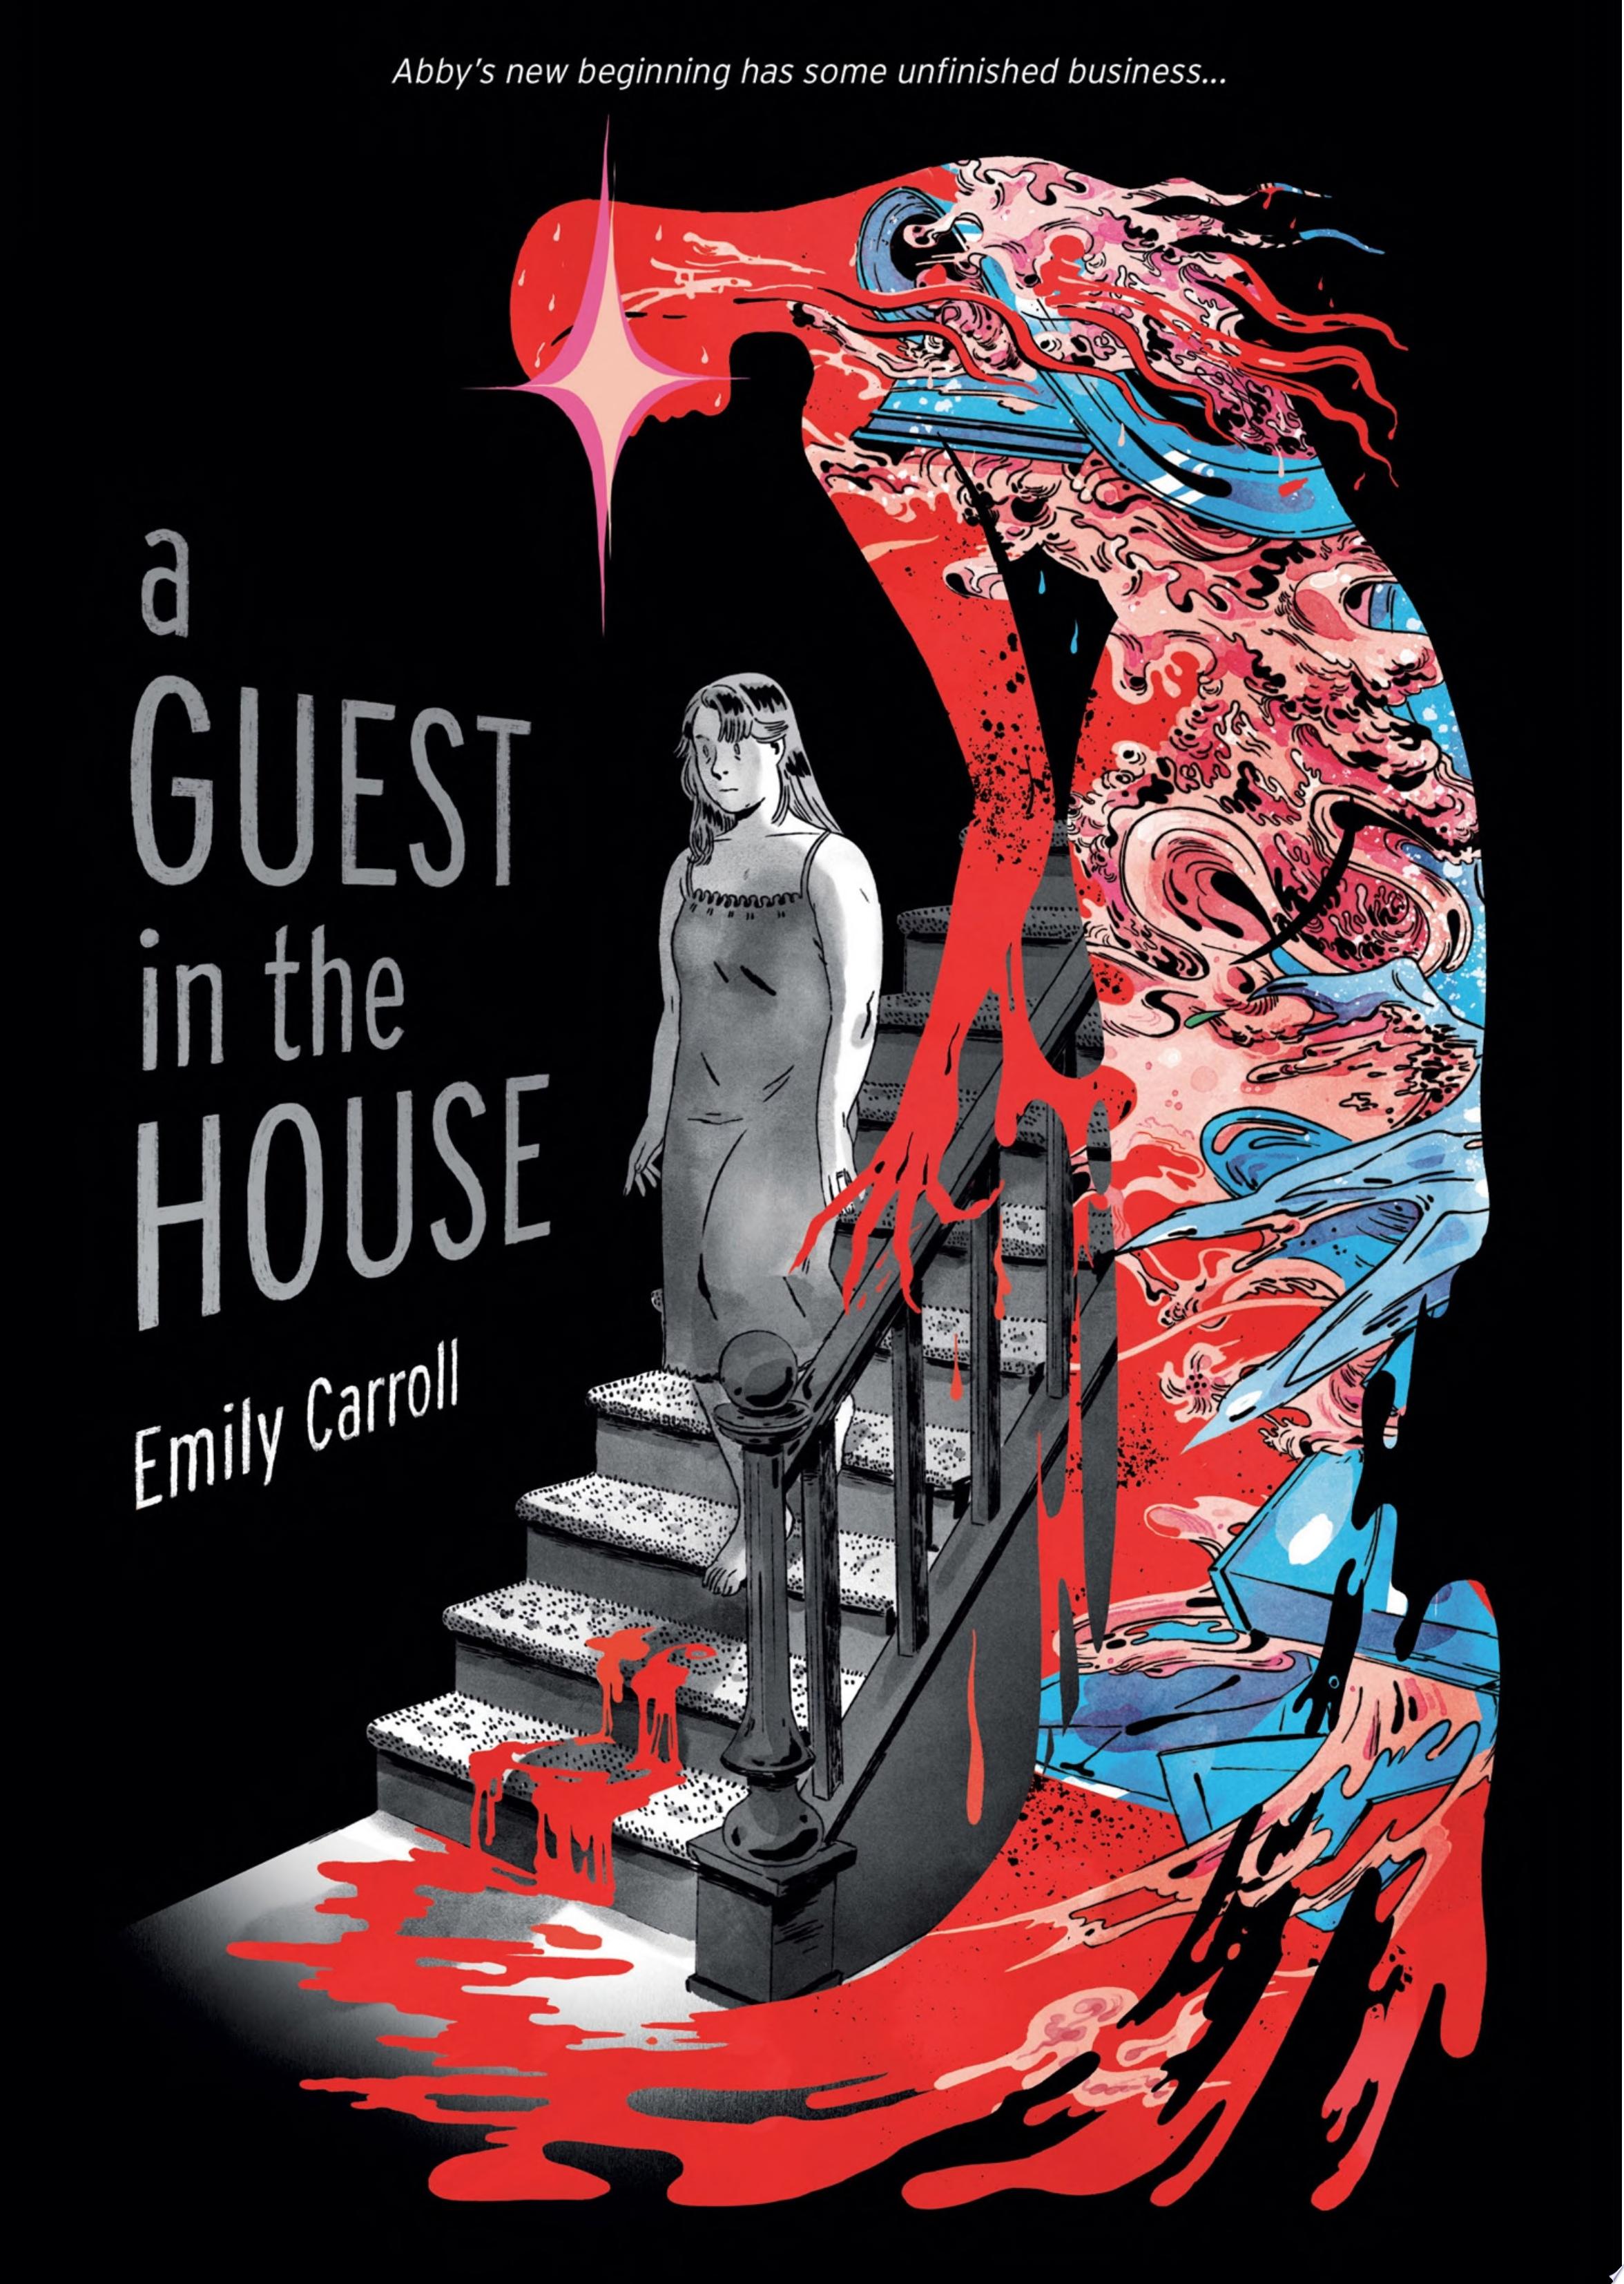 Image for "A Guest in the House"